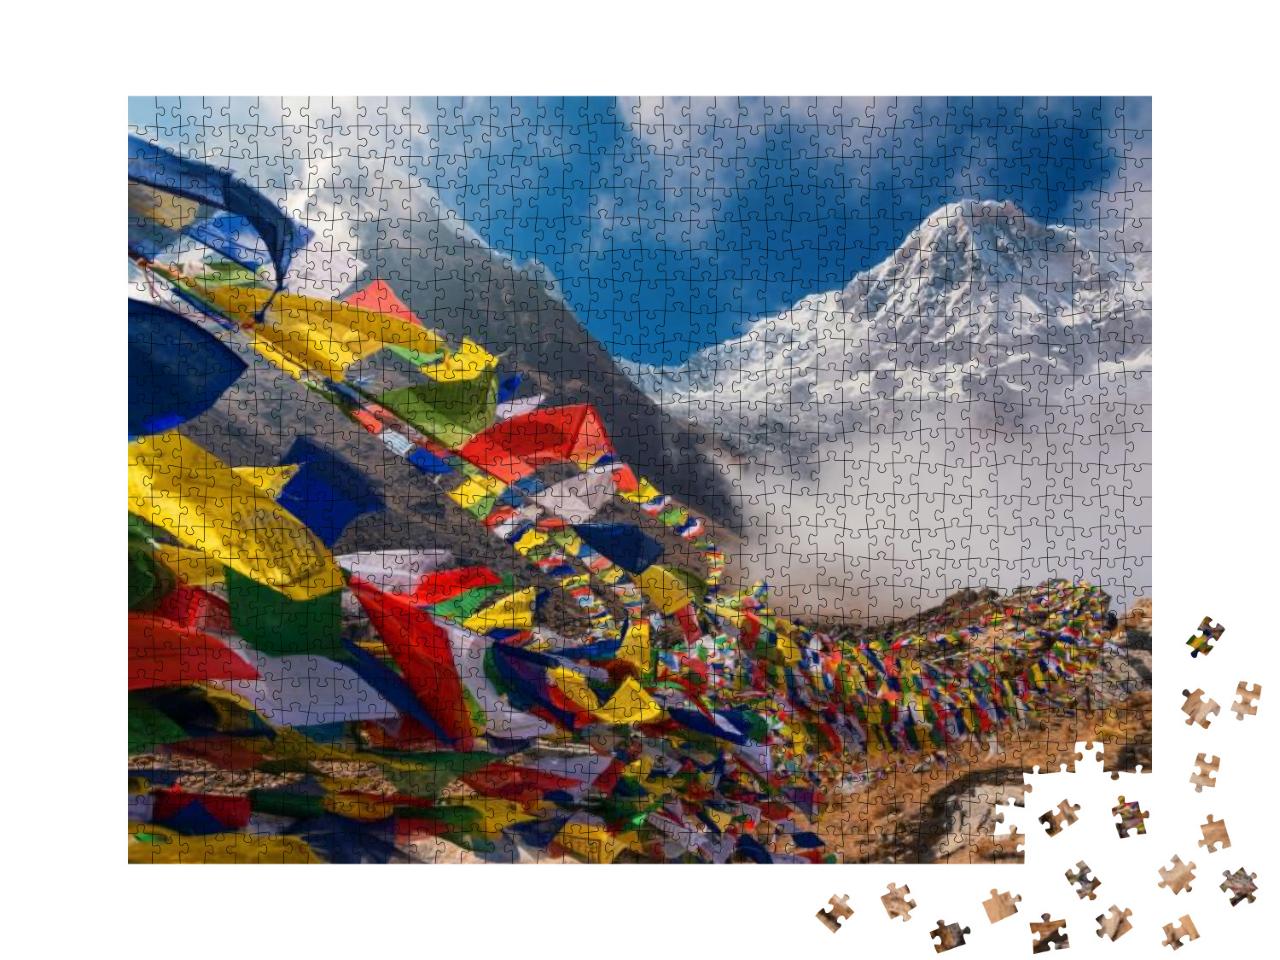 Prayer Flags & Mt. Annapurna I Background from Annapurna... Jigsaw Puzzle with 1000 pieces